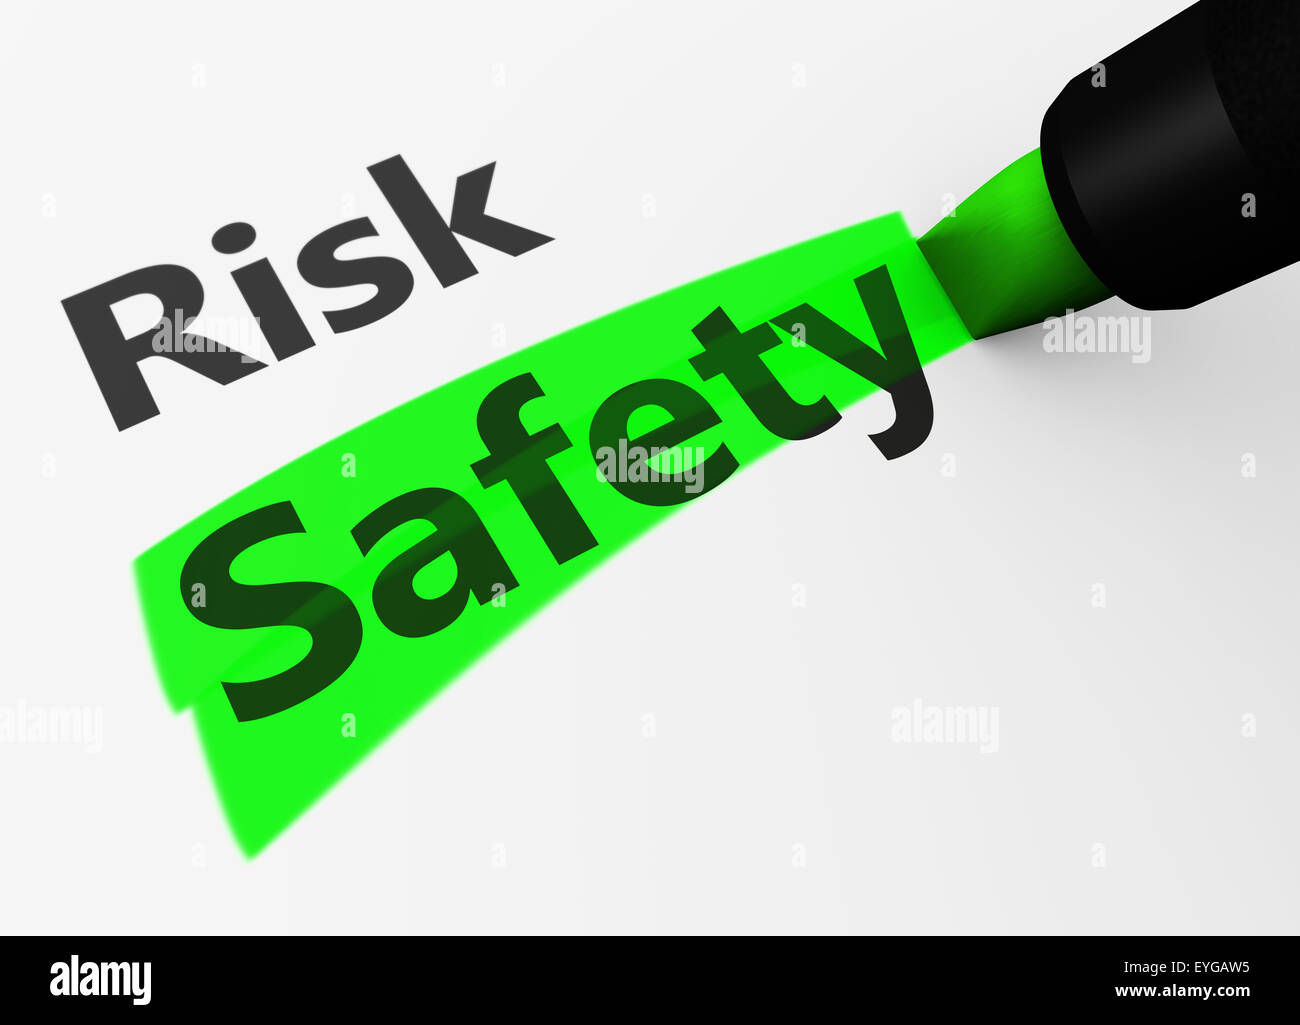 Safety and security concept with a 3d render of risk text and safety word highlighted with a green marker. Stock Photo